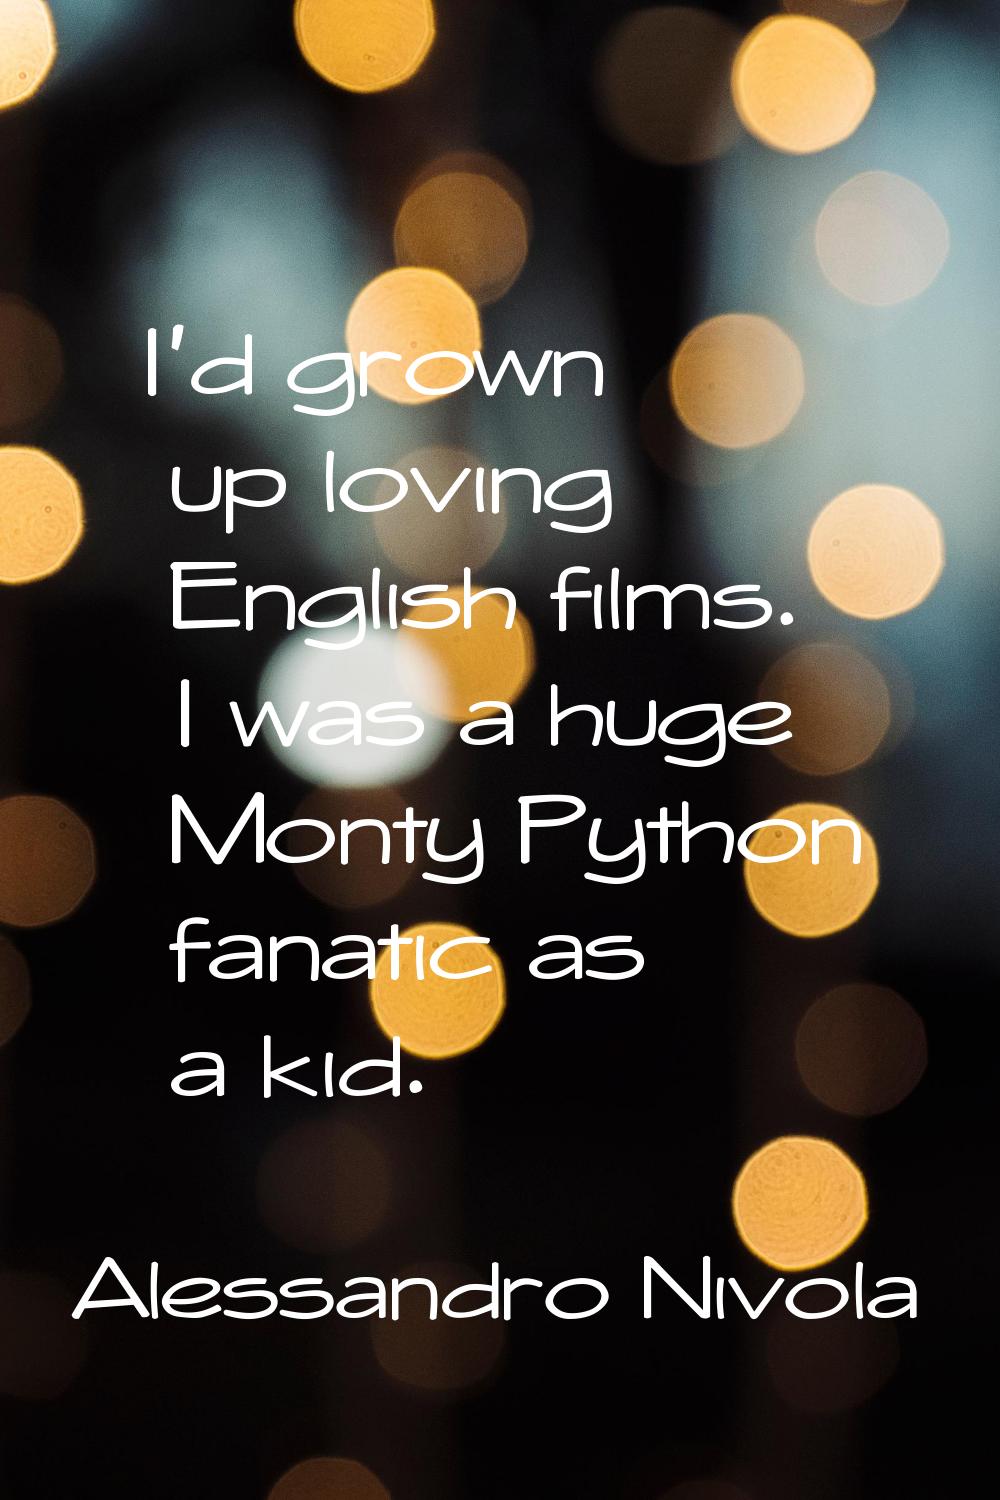 I'd grown up loving English films. I was a huge Monty Python fanatic as a kid.